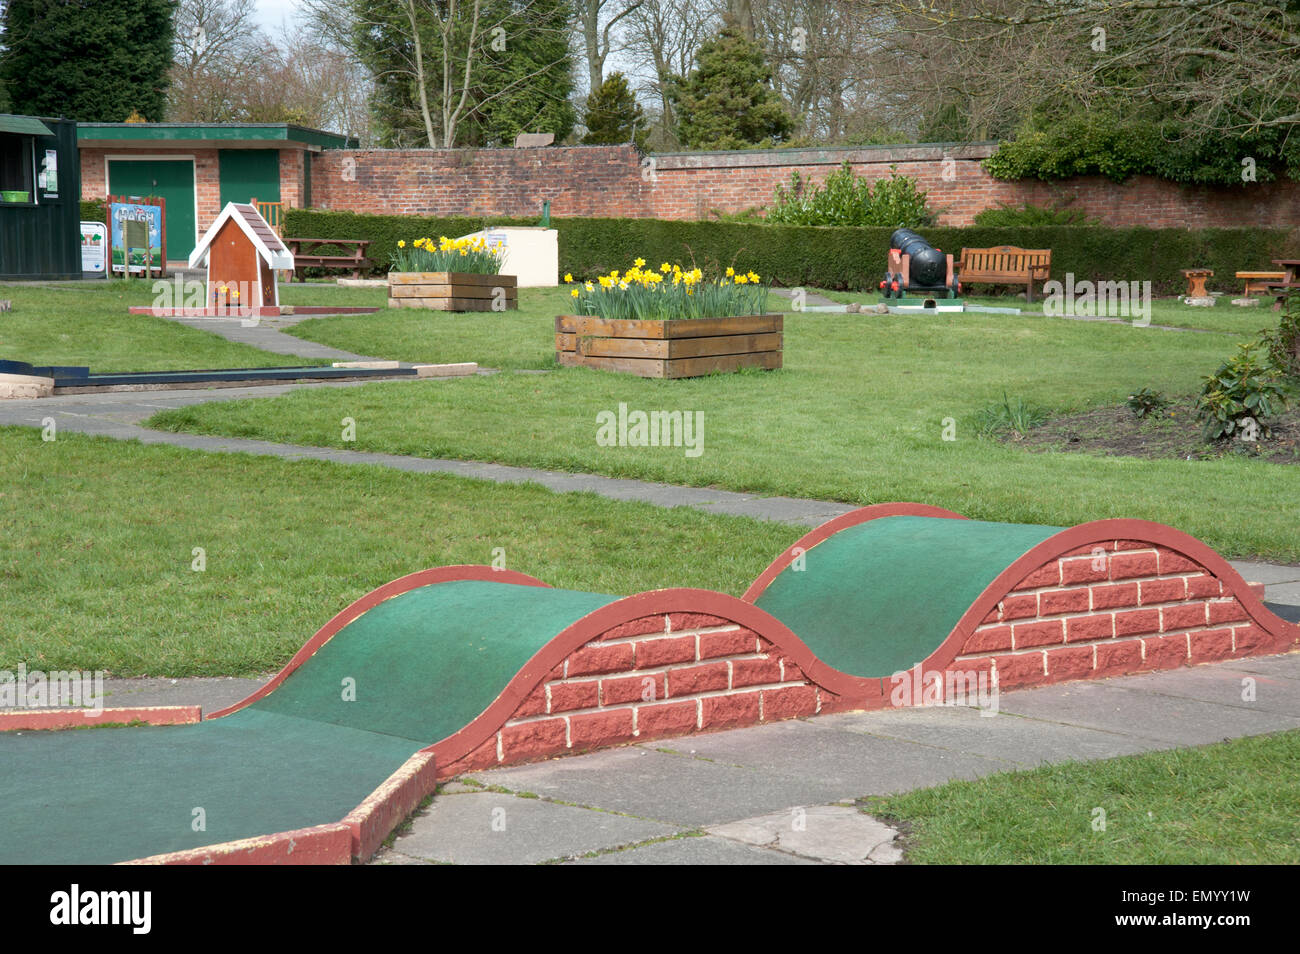 Crazy Golf course, Haigh Hall, Wigan, England, UK, Great Britain, Europe Stock Photo